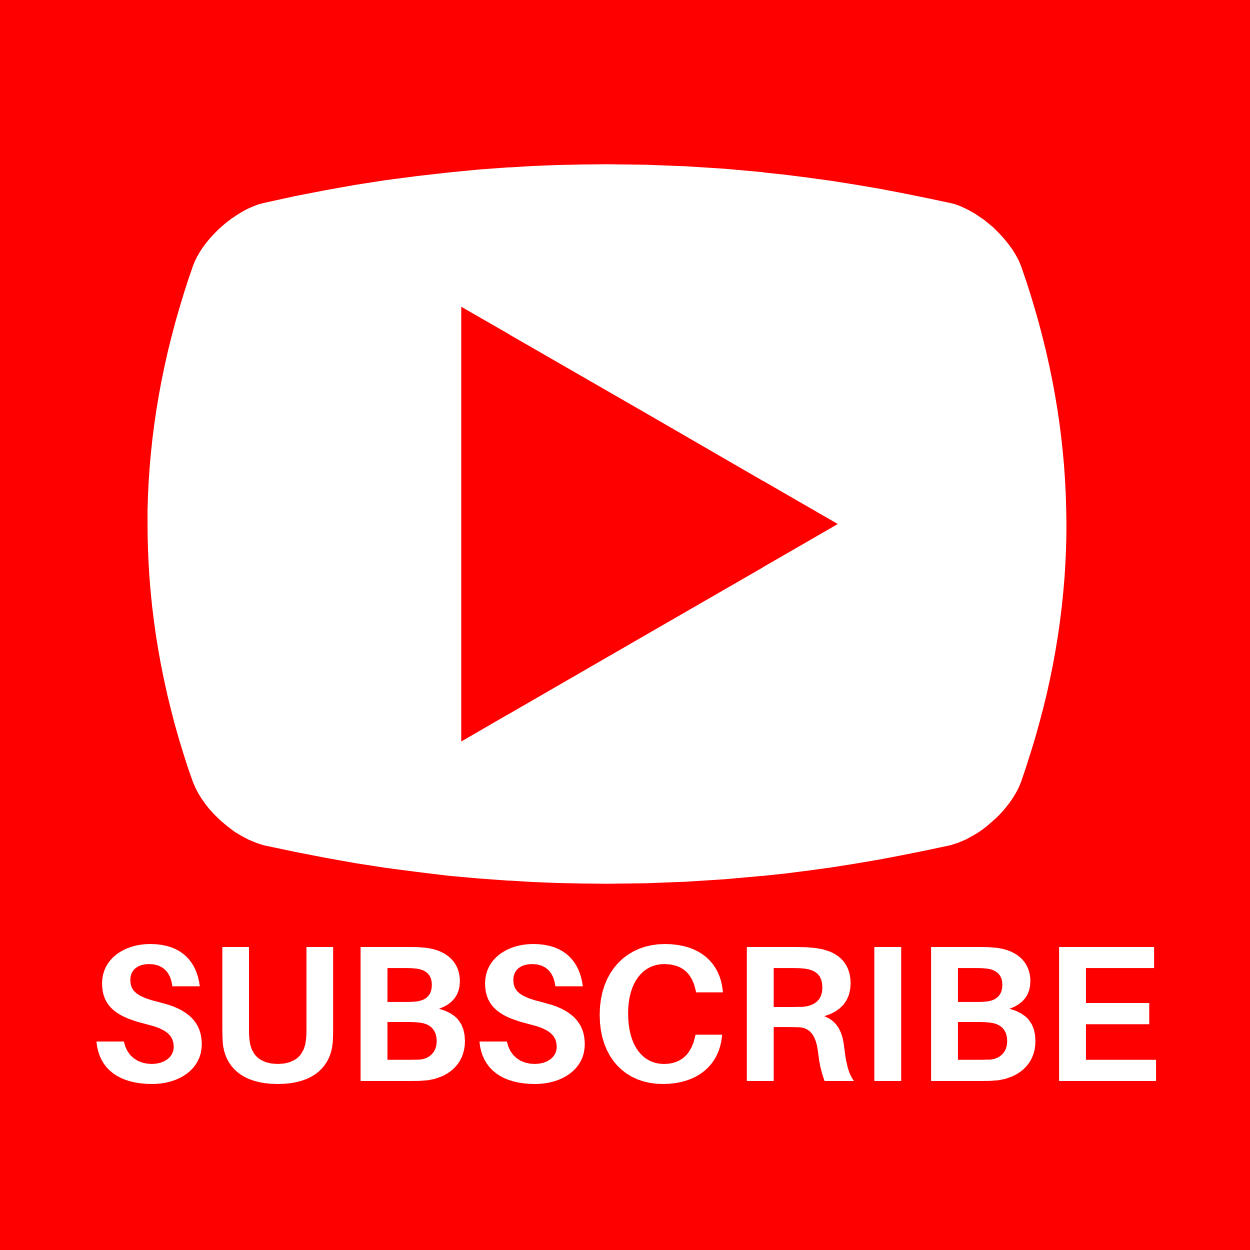 How to Quickly Add a Subscribe Button to Your YouTube Videos 10 Free Subscribe Button PNGs. Video game background, Youtube logo, Kindergarten graduation speech